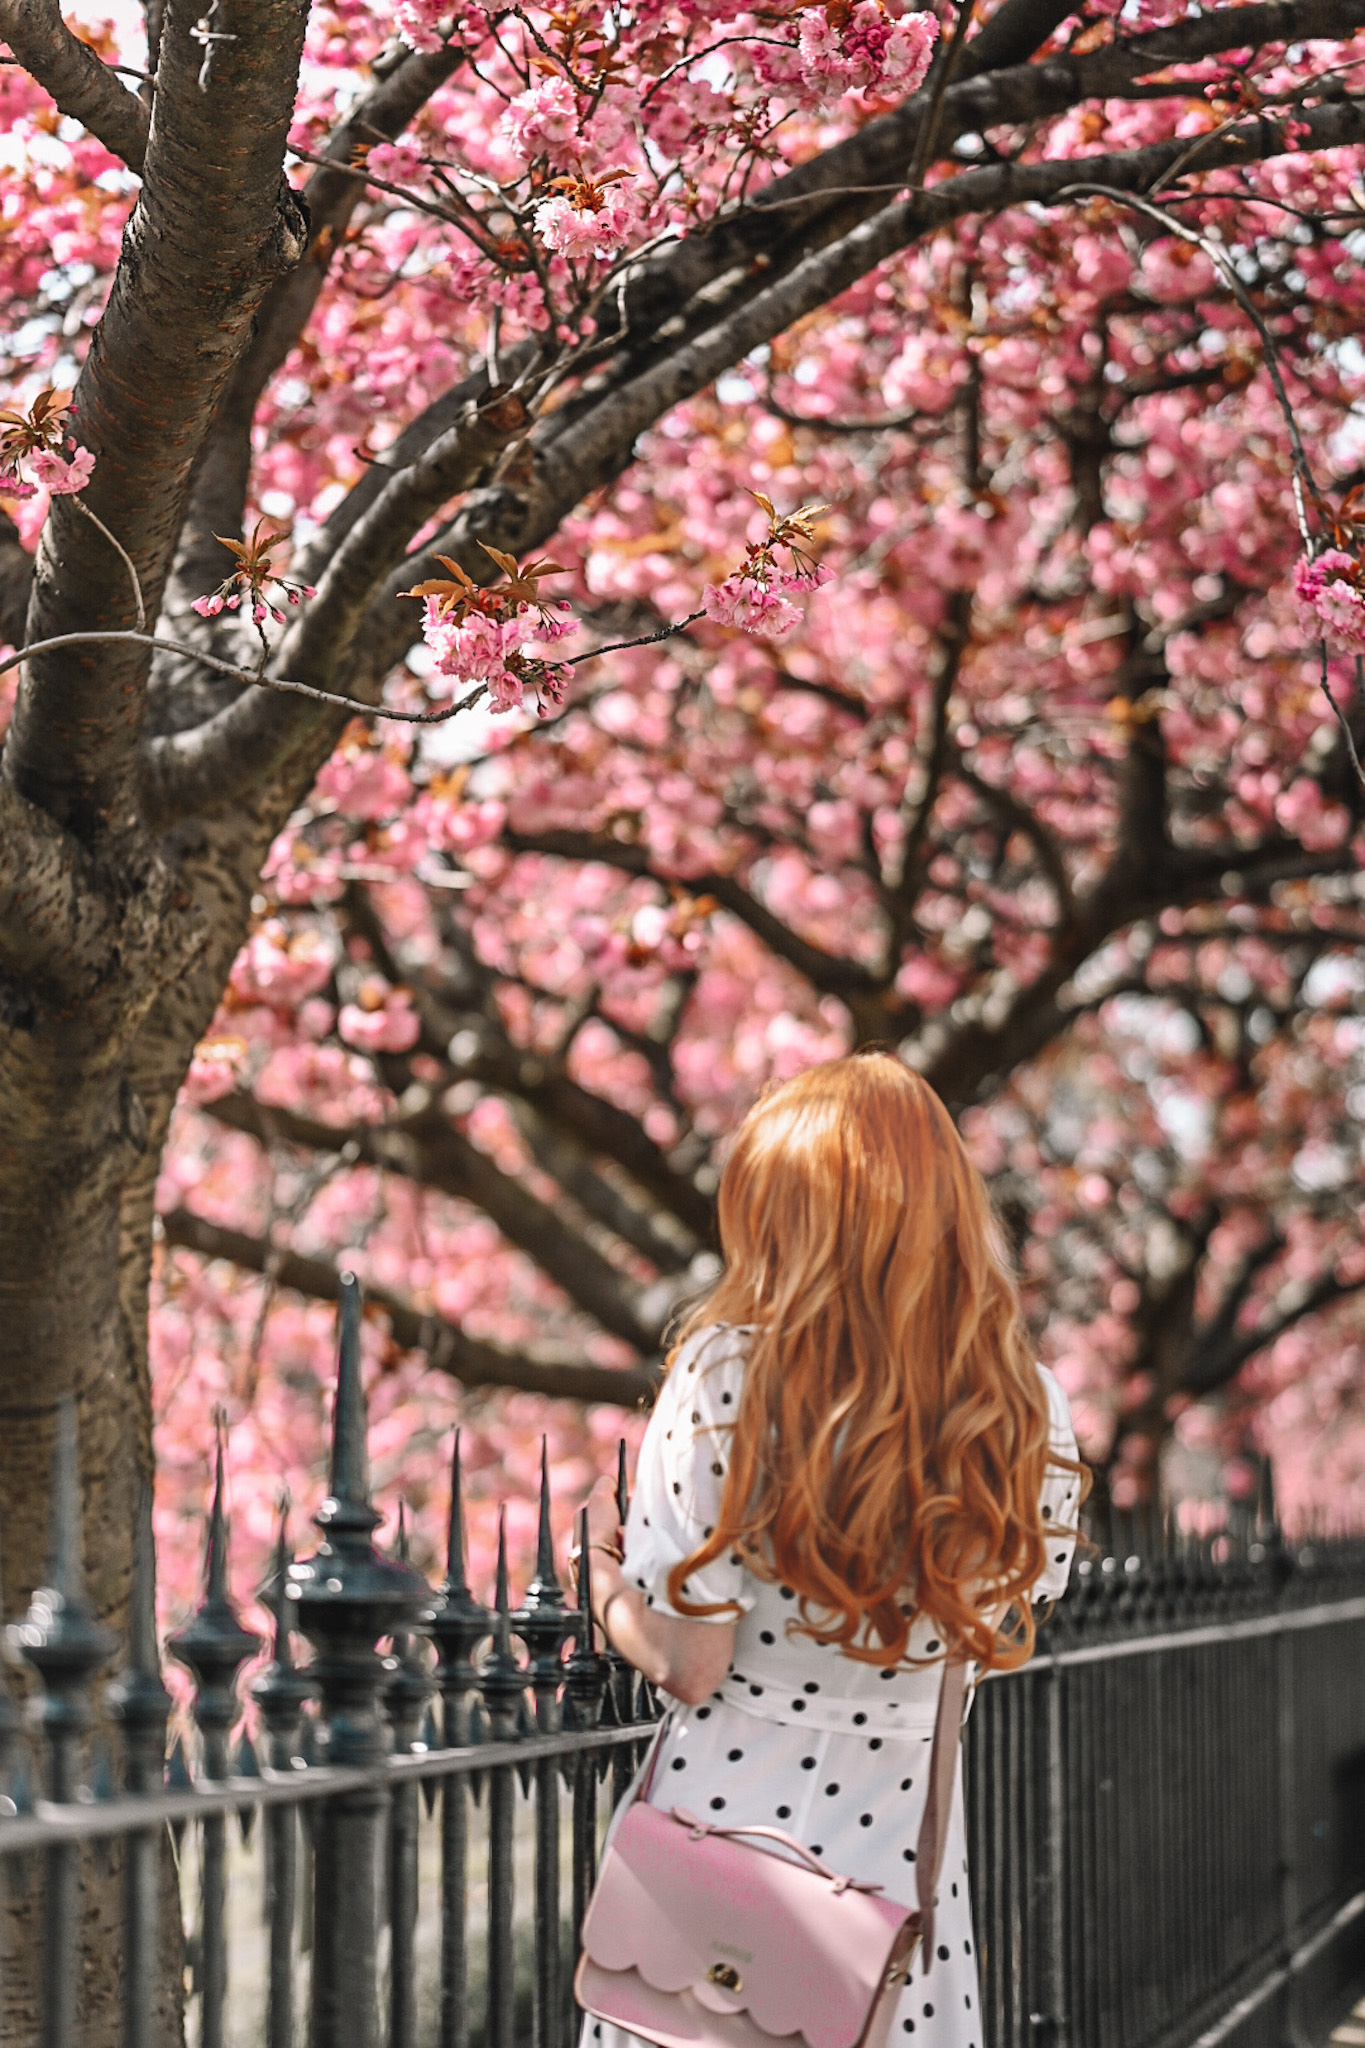 Amber standing underneath a canopy of cherry blossom in Edinburgh